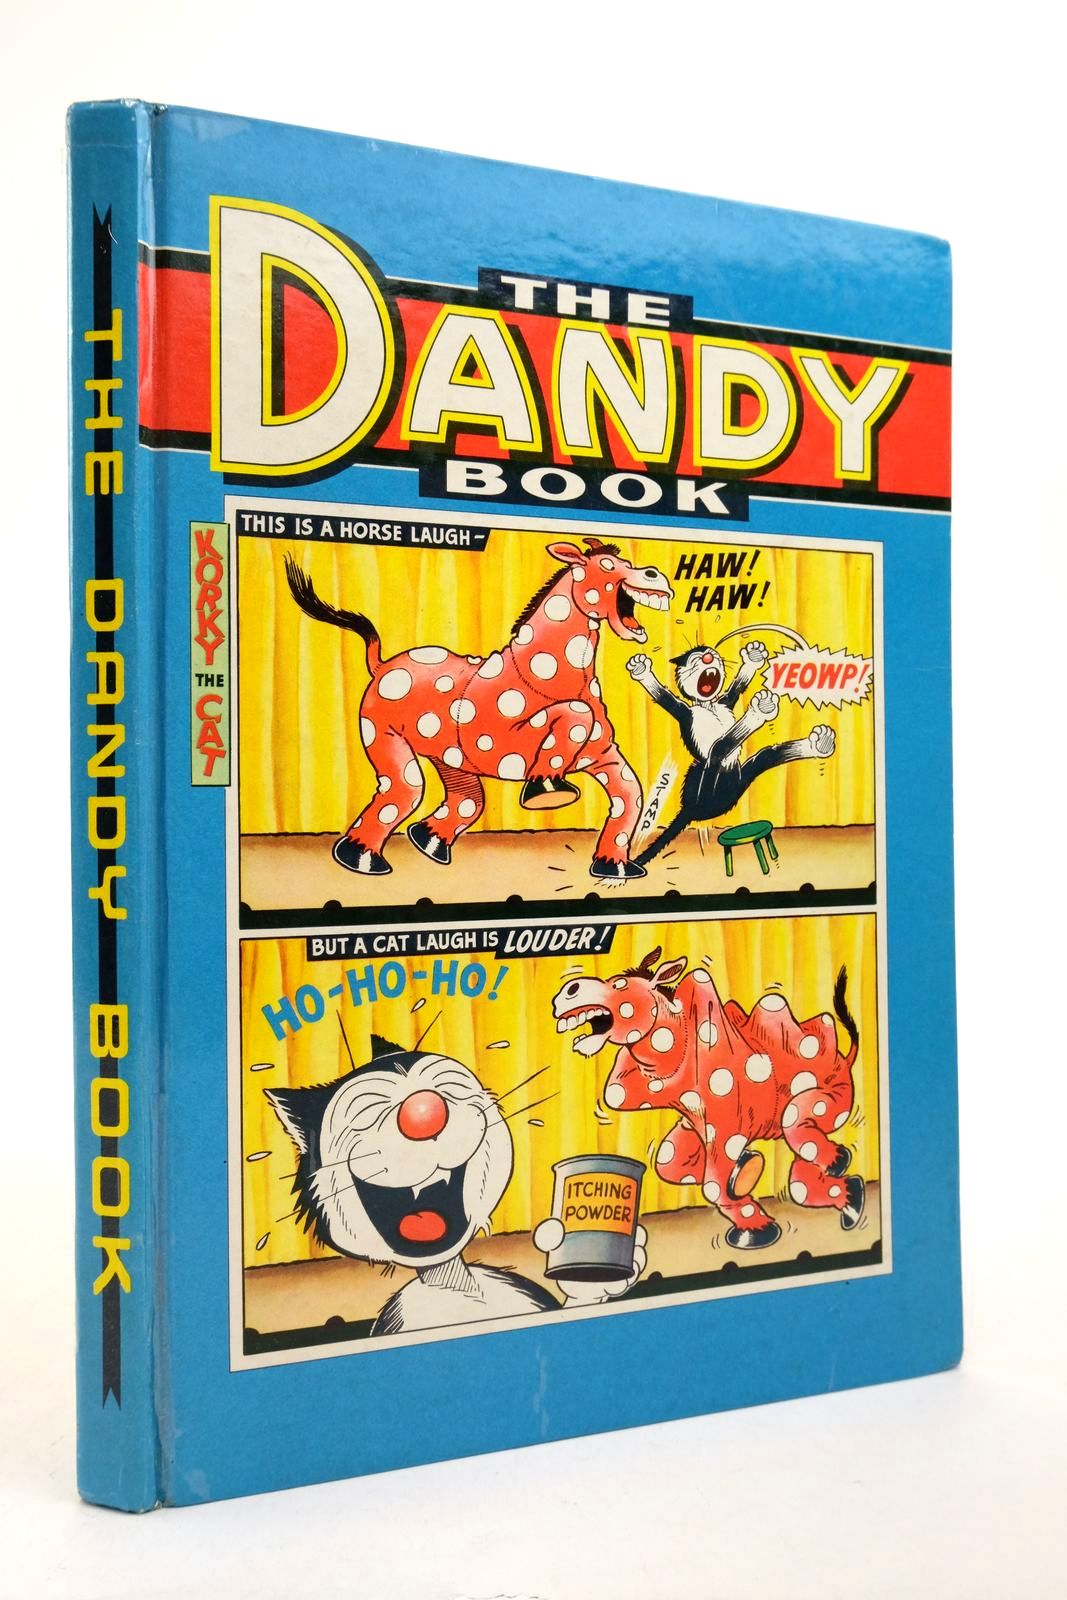 Photo of THE DANDY BOOK 1965 published by D.C. Thomson & Co Ltd. (STOCK CODE: 2140612)  for sale by Stella & Rose's Books